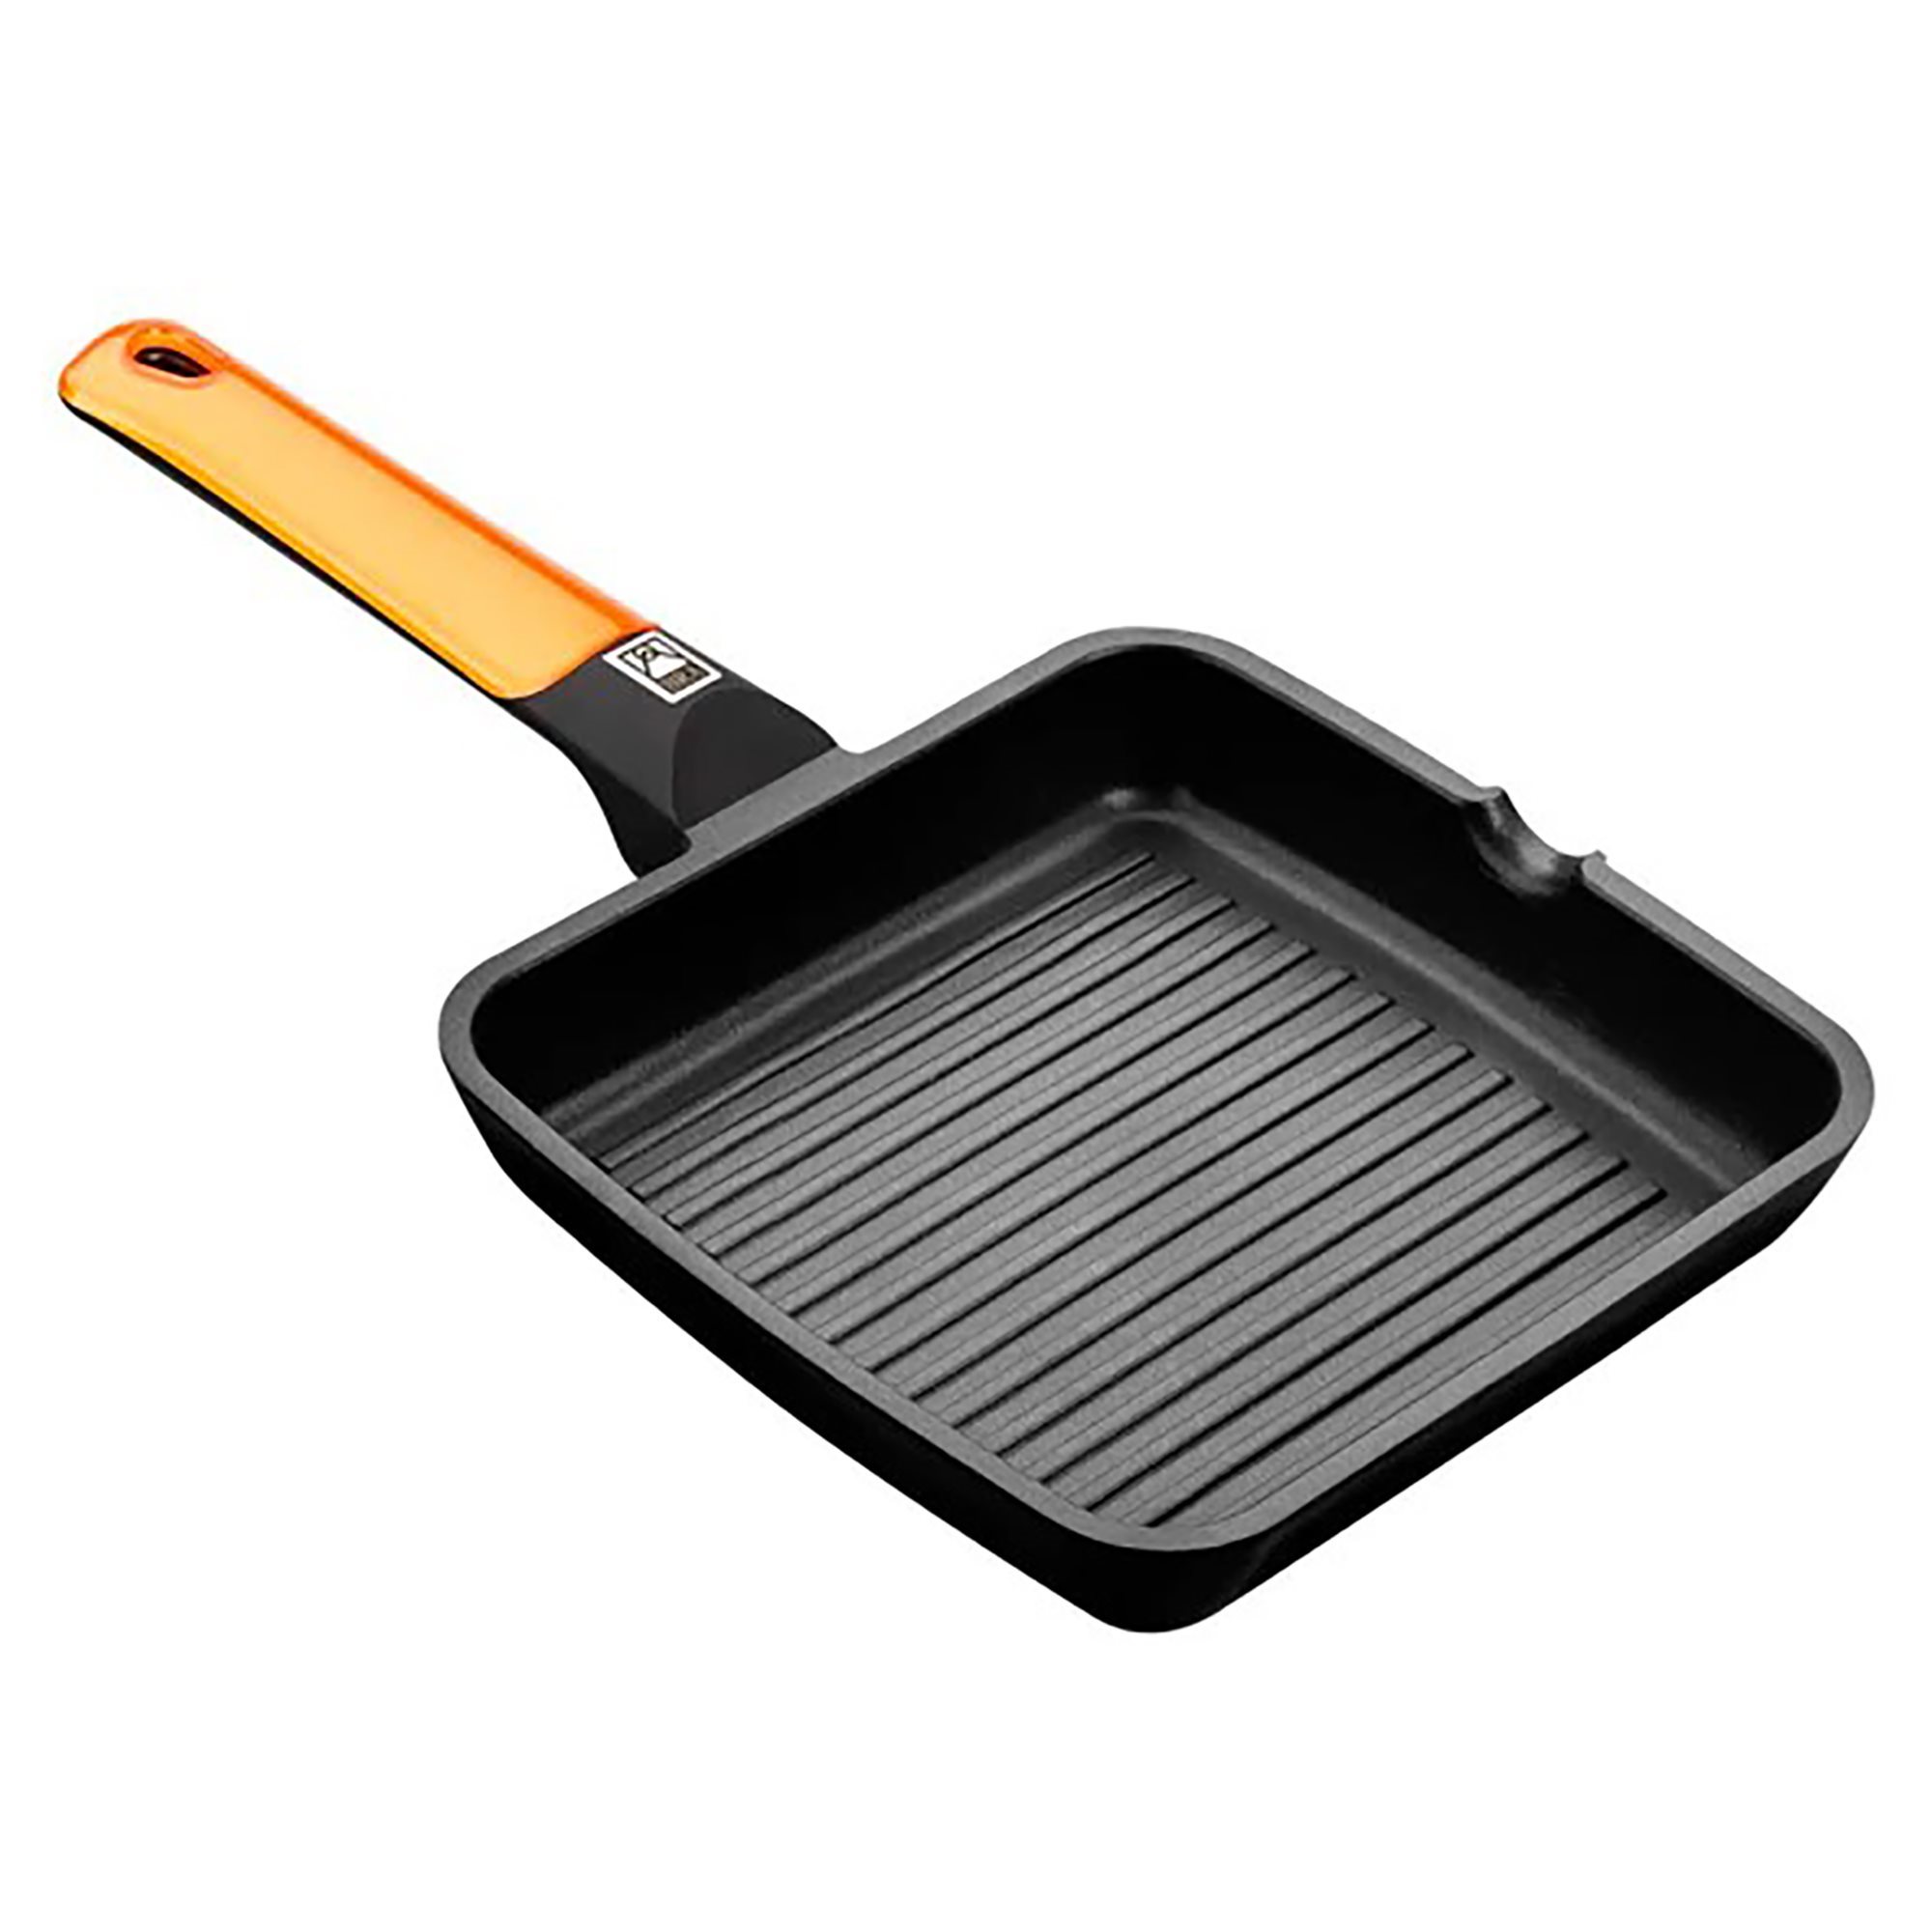 Square griddle grill pan Efficient Iron - BRA